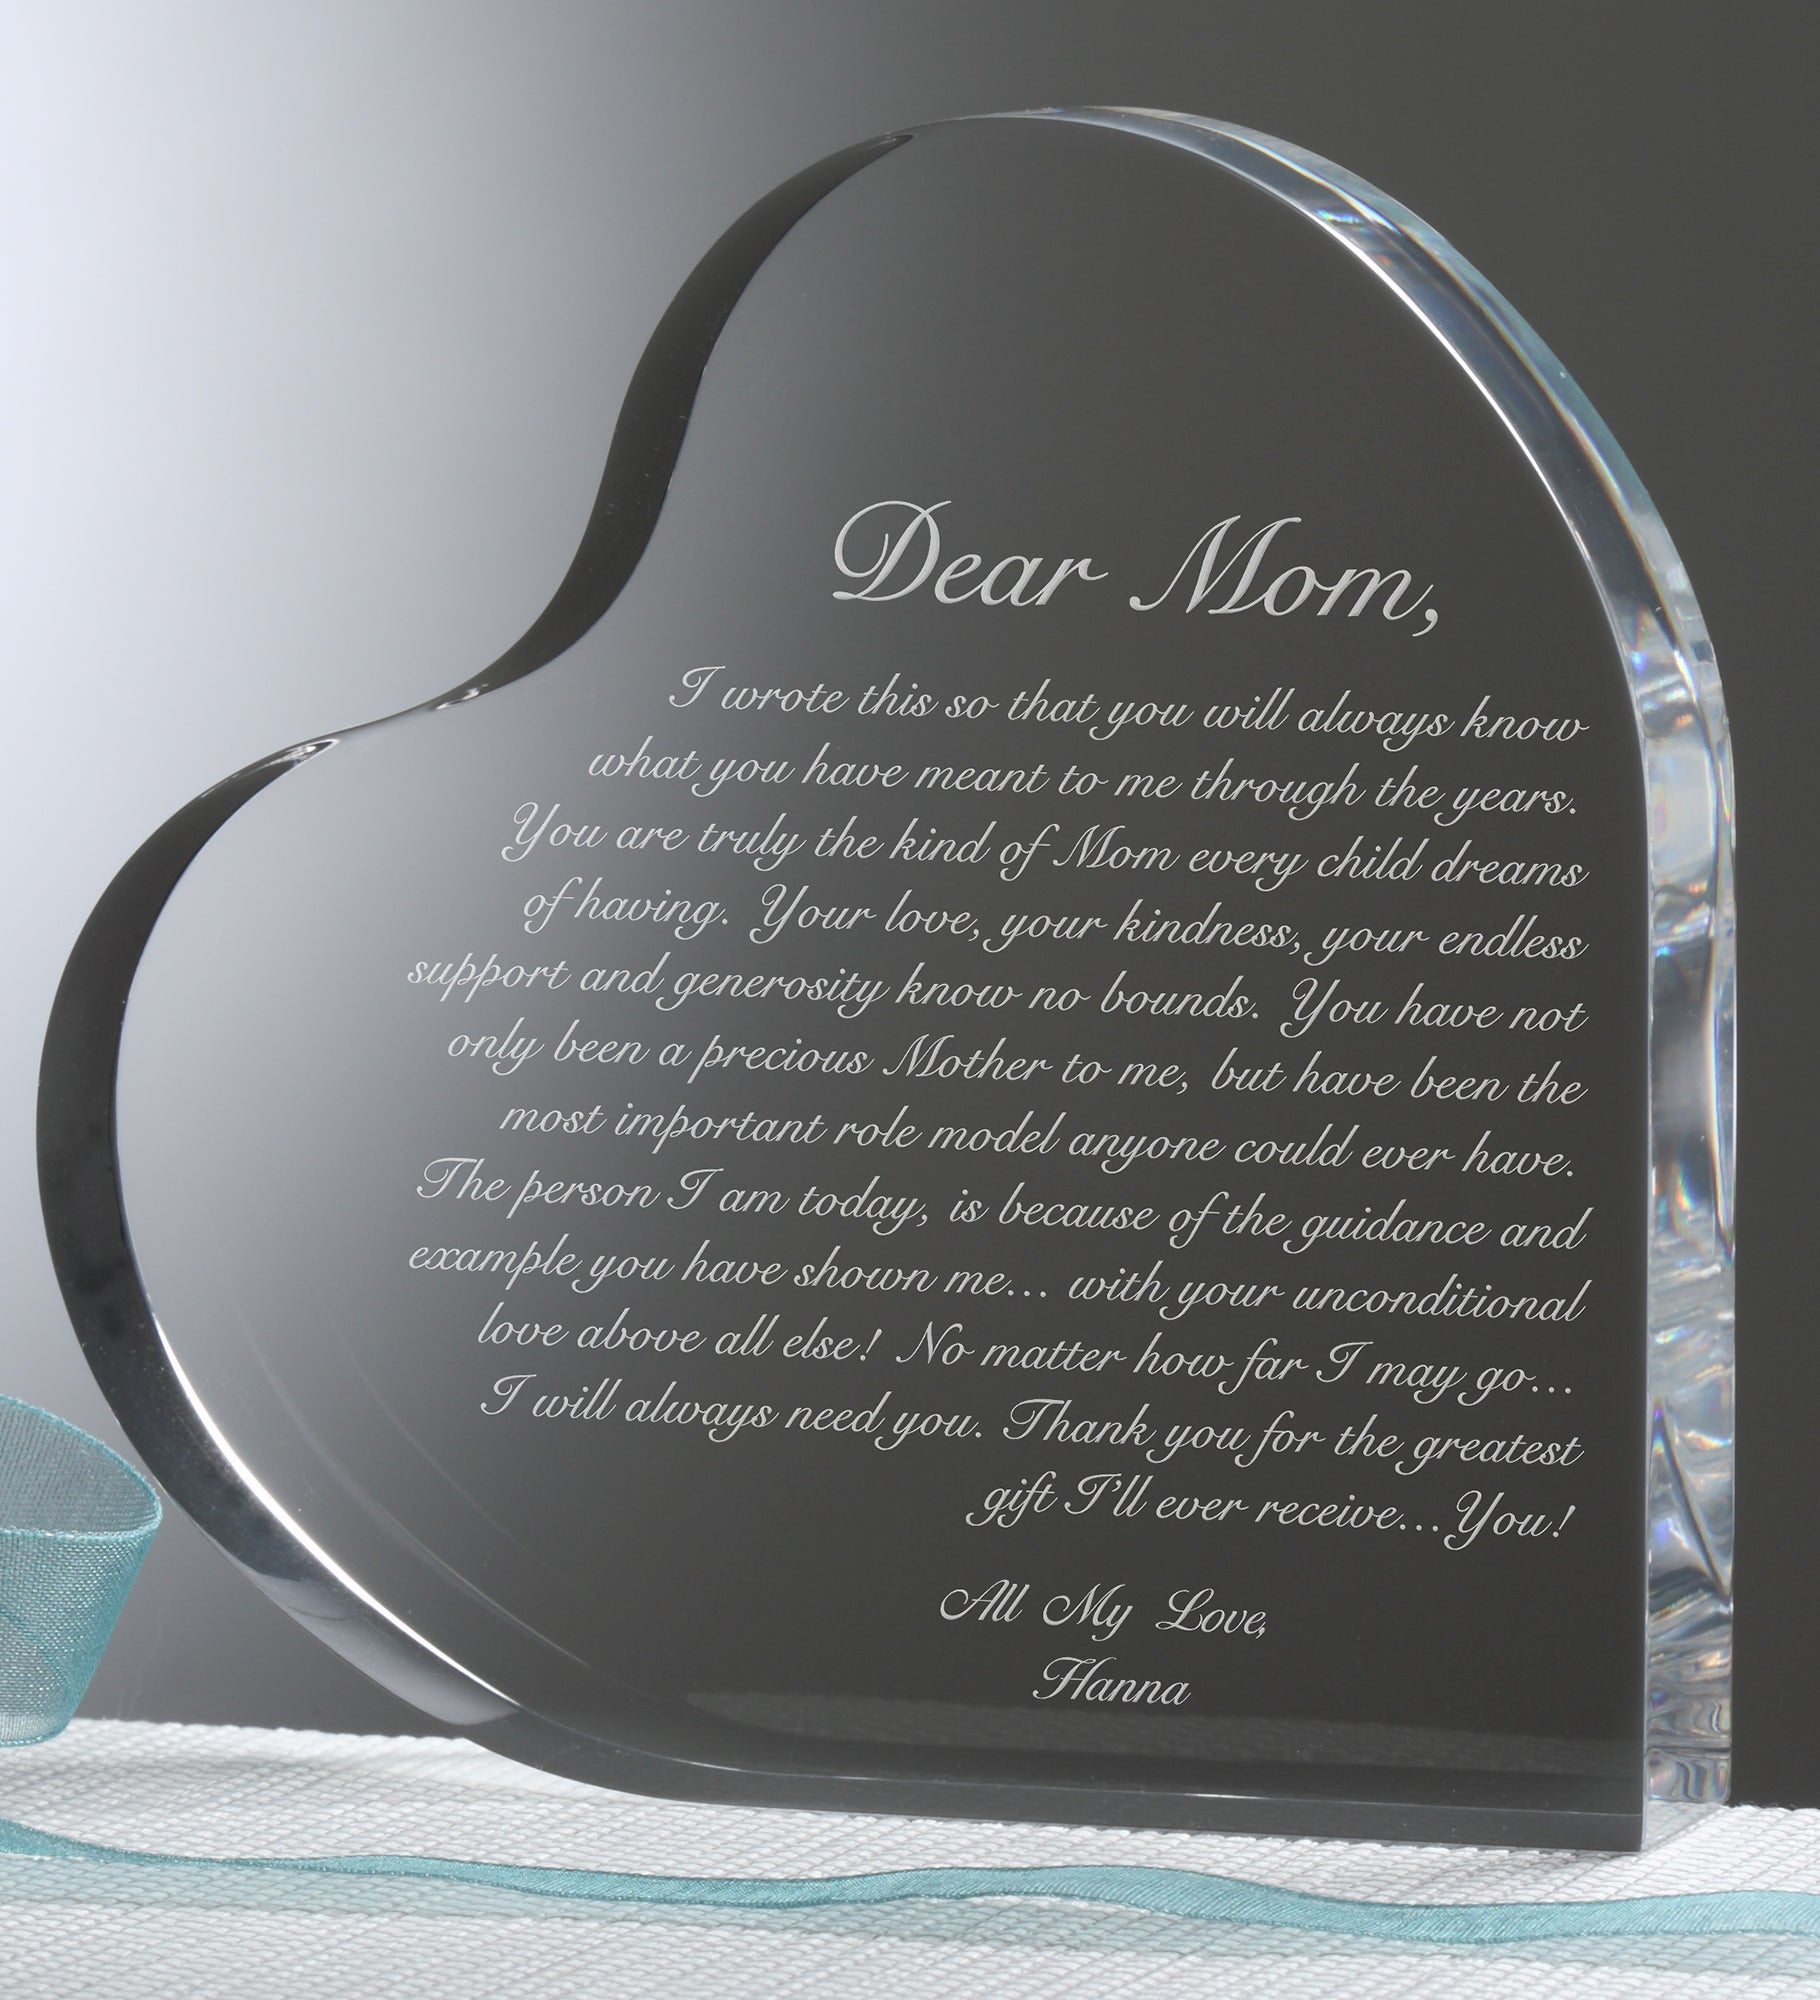 A Letter To Mom Personalized Heart Sculpture